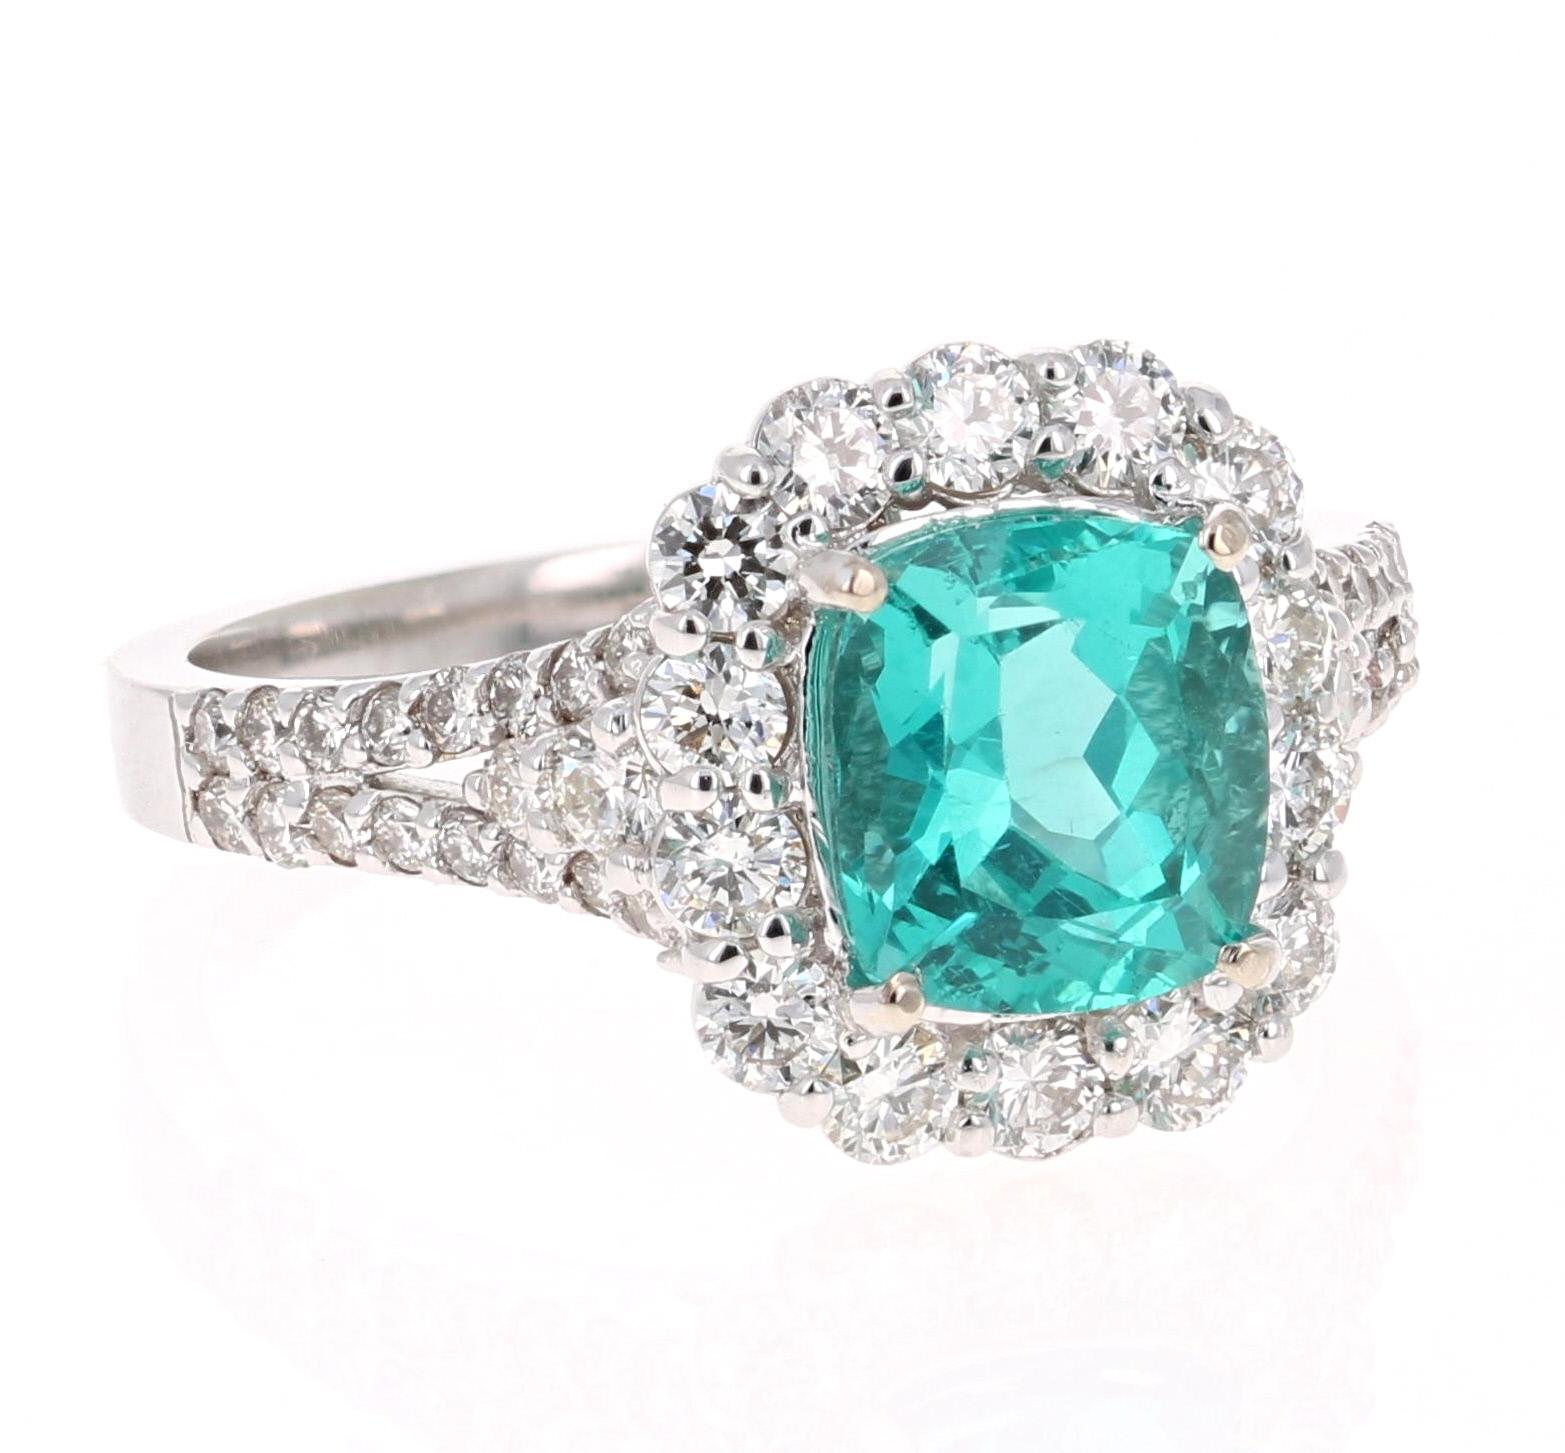 Gorgeous  Apatite and Diamond Ring.  
This ring has a 2.27 carat Cushion Cut Apatite in the center of the ring and is surrounded by 50 Round Cut Diamonds that weigh 1.01 carats (Clarity: VS2, Color:H).  The total carat weight of the ring is 3.28